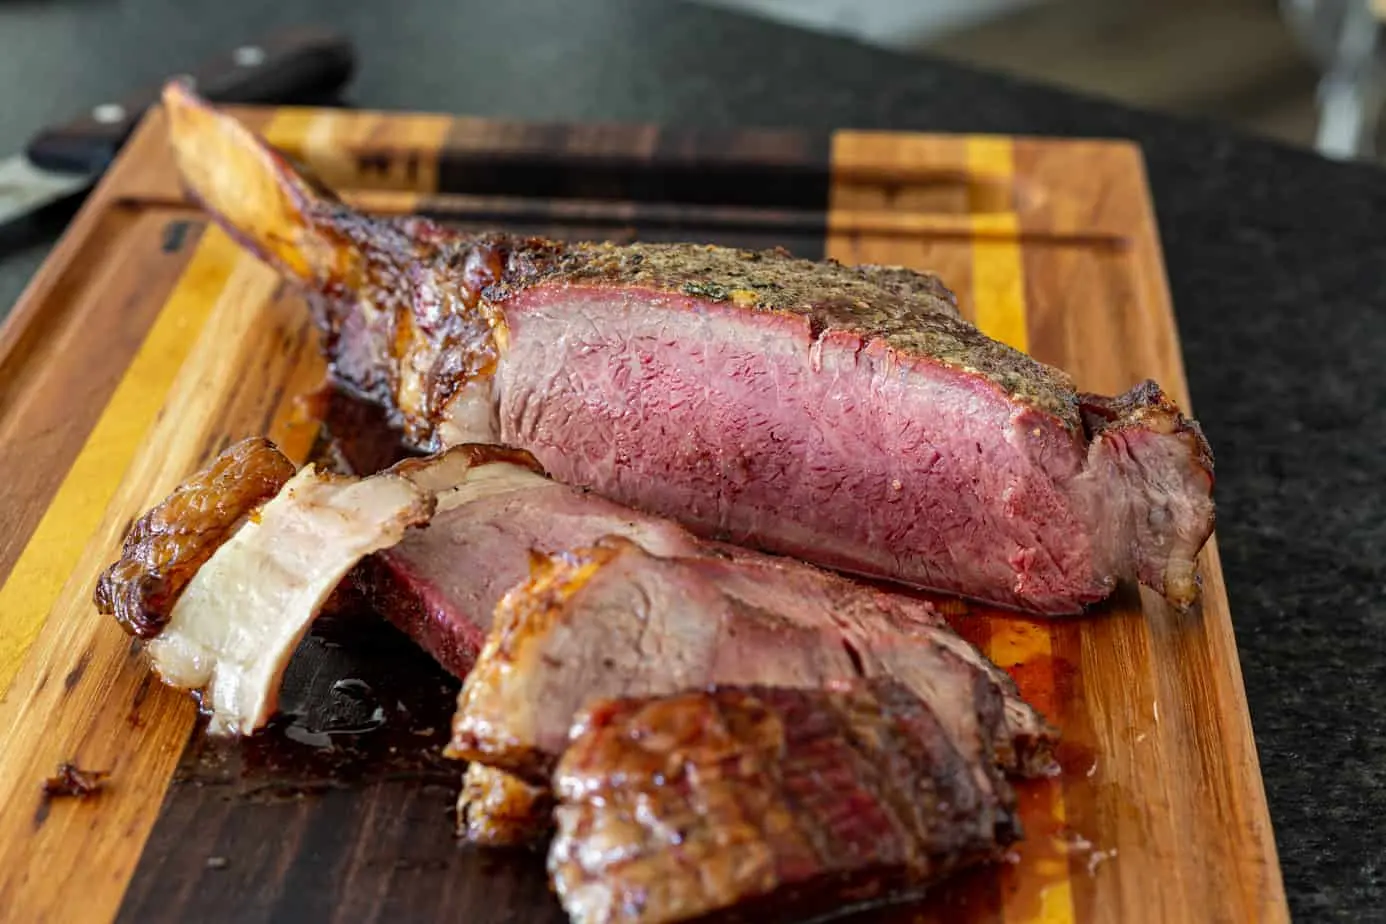 smoked tomahawk steak temperature - What is the internal temperature of a tomahawk steak